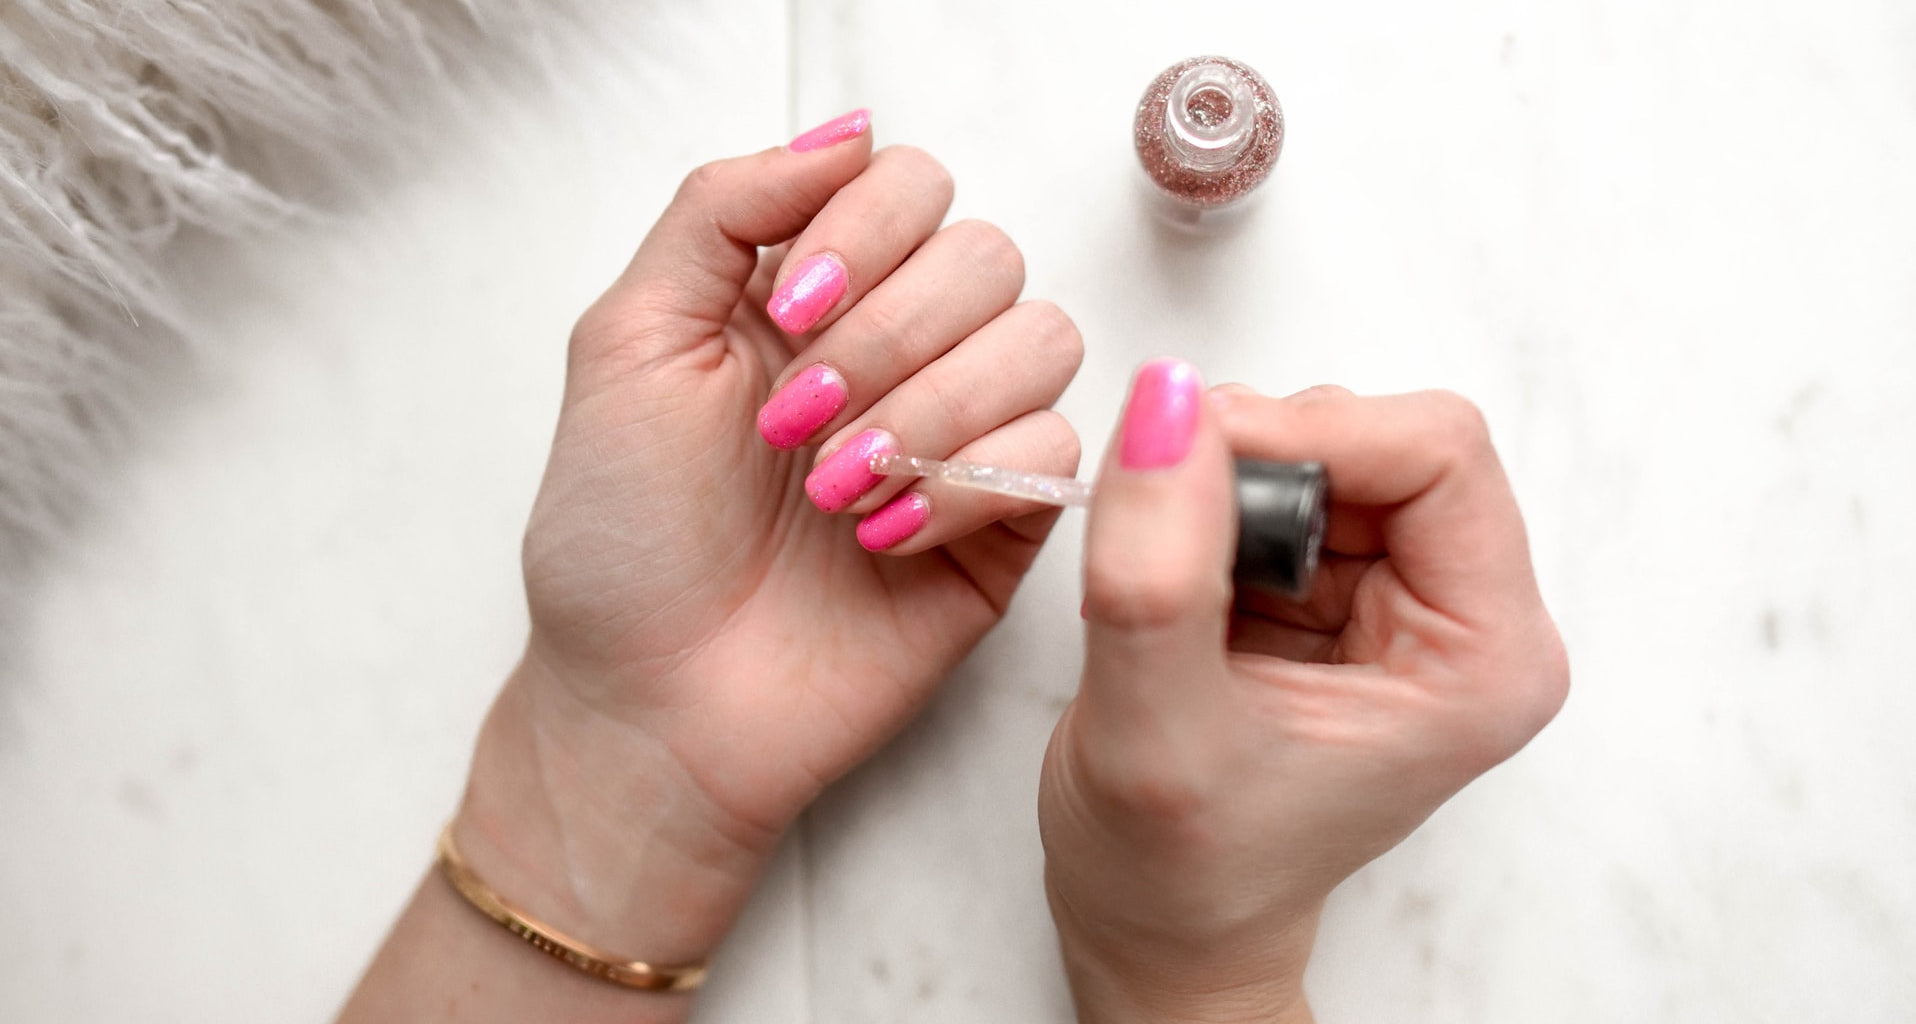 Tips for Healthy Strong Nails - 10 Secrets to Strengthen Your Nails